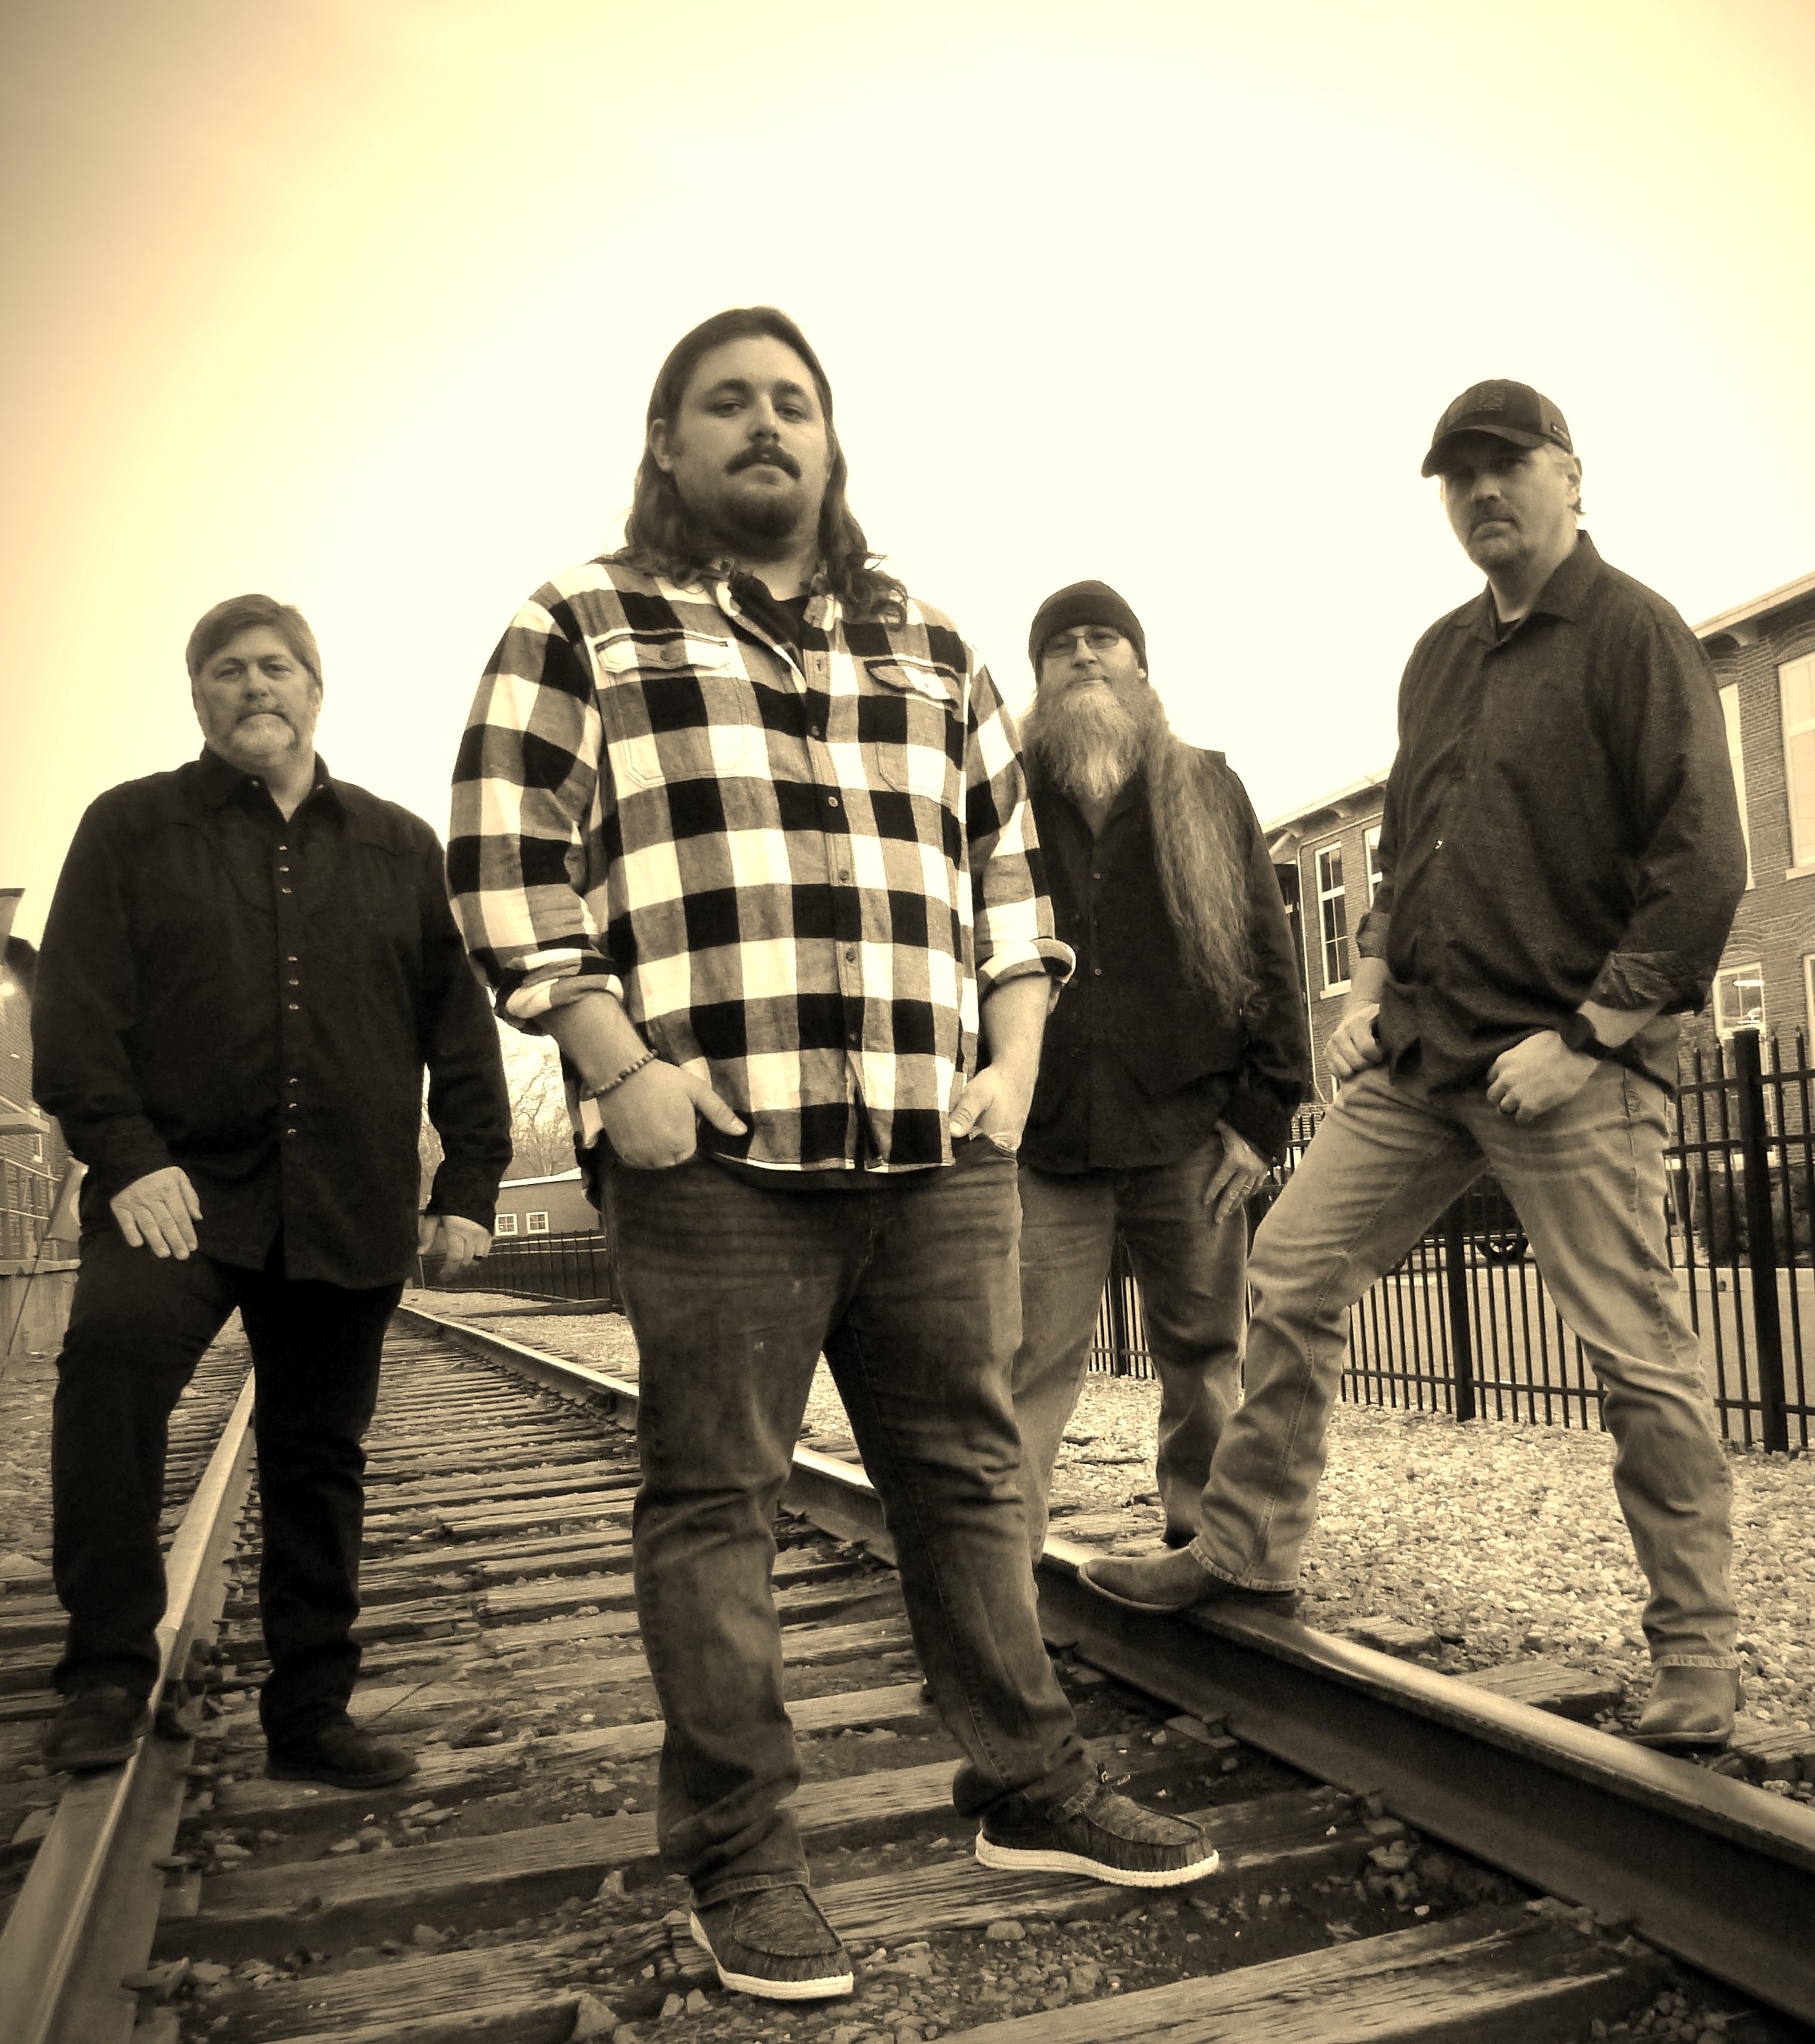 Bettin’ On The Mule Releases New Single "Tornado" - A Blend of Classic Rock and Southern Spirit